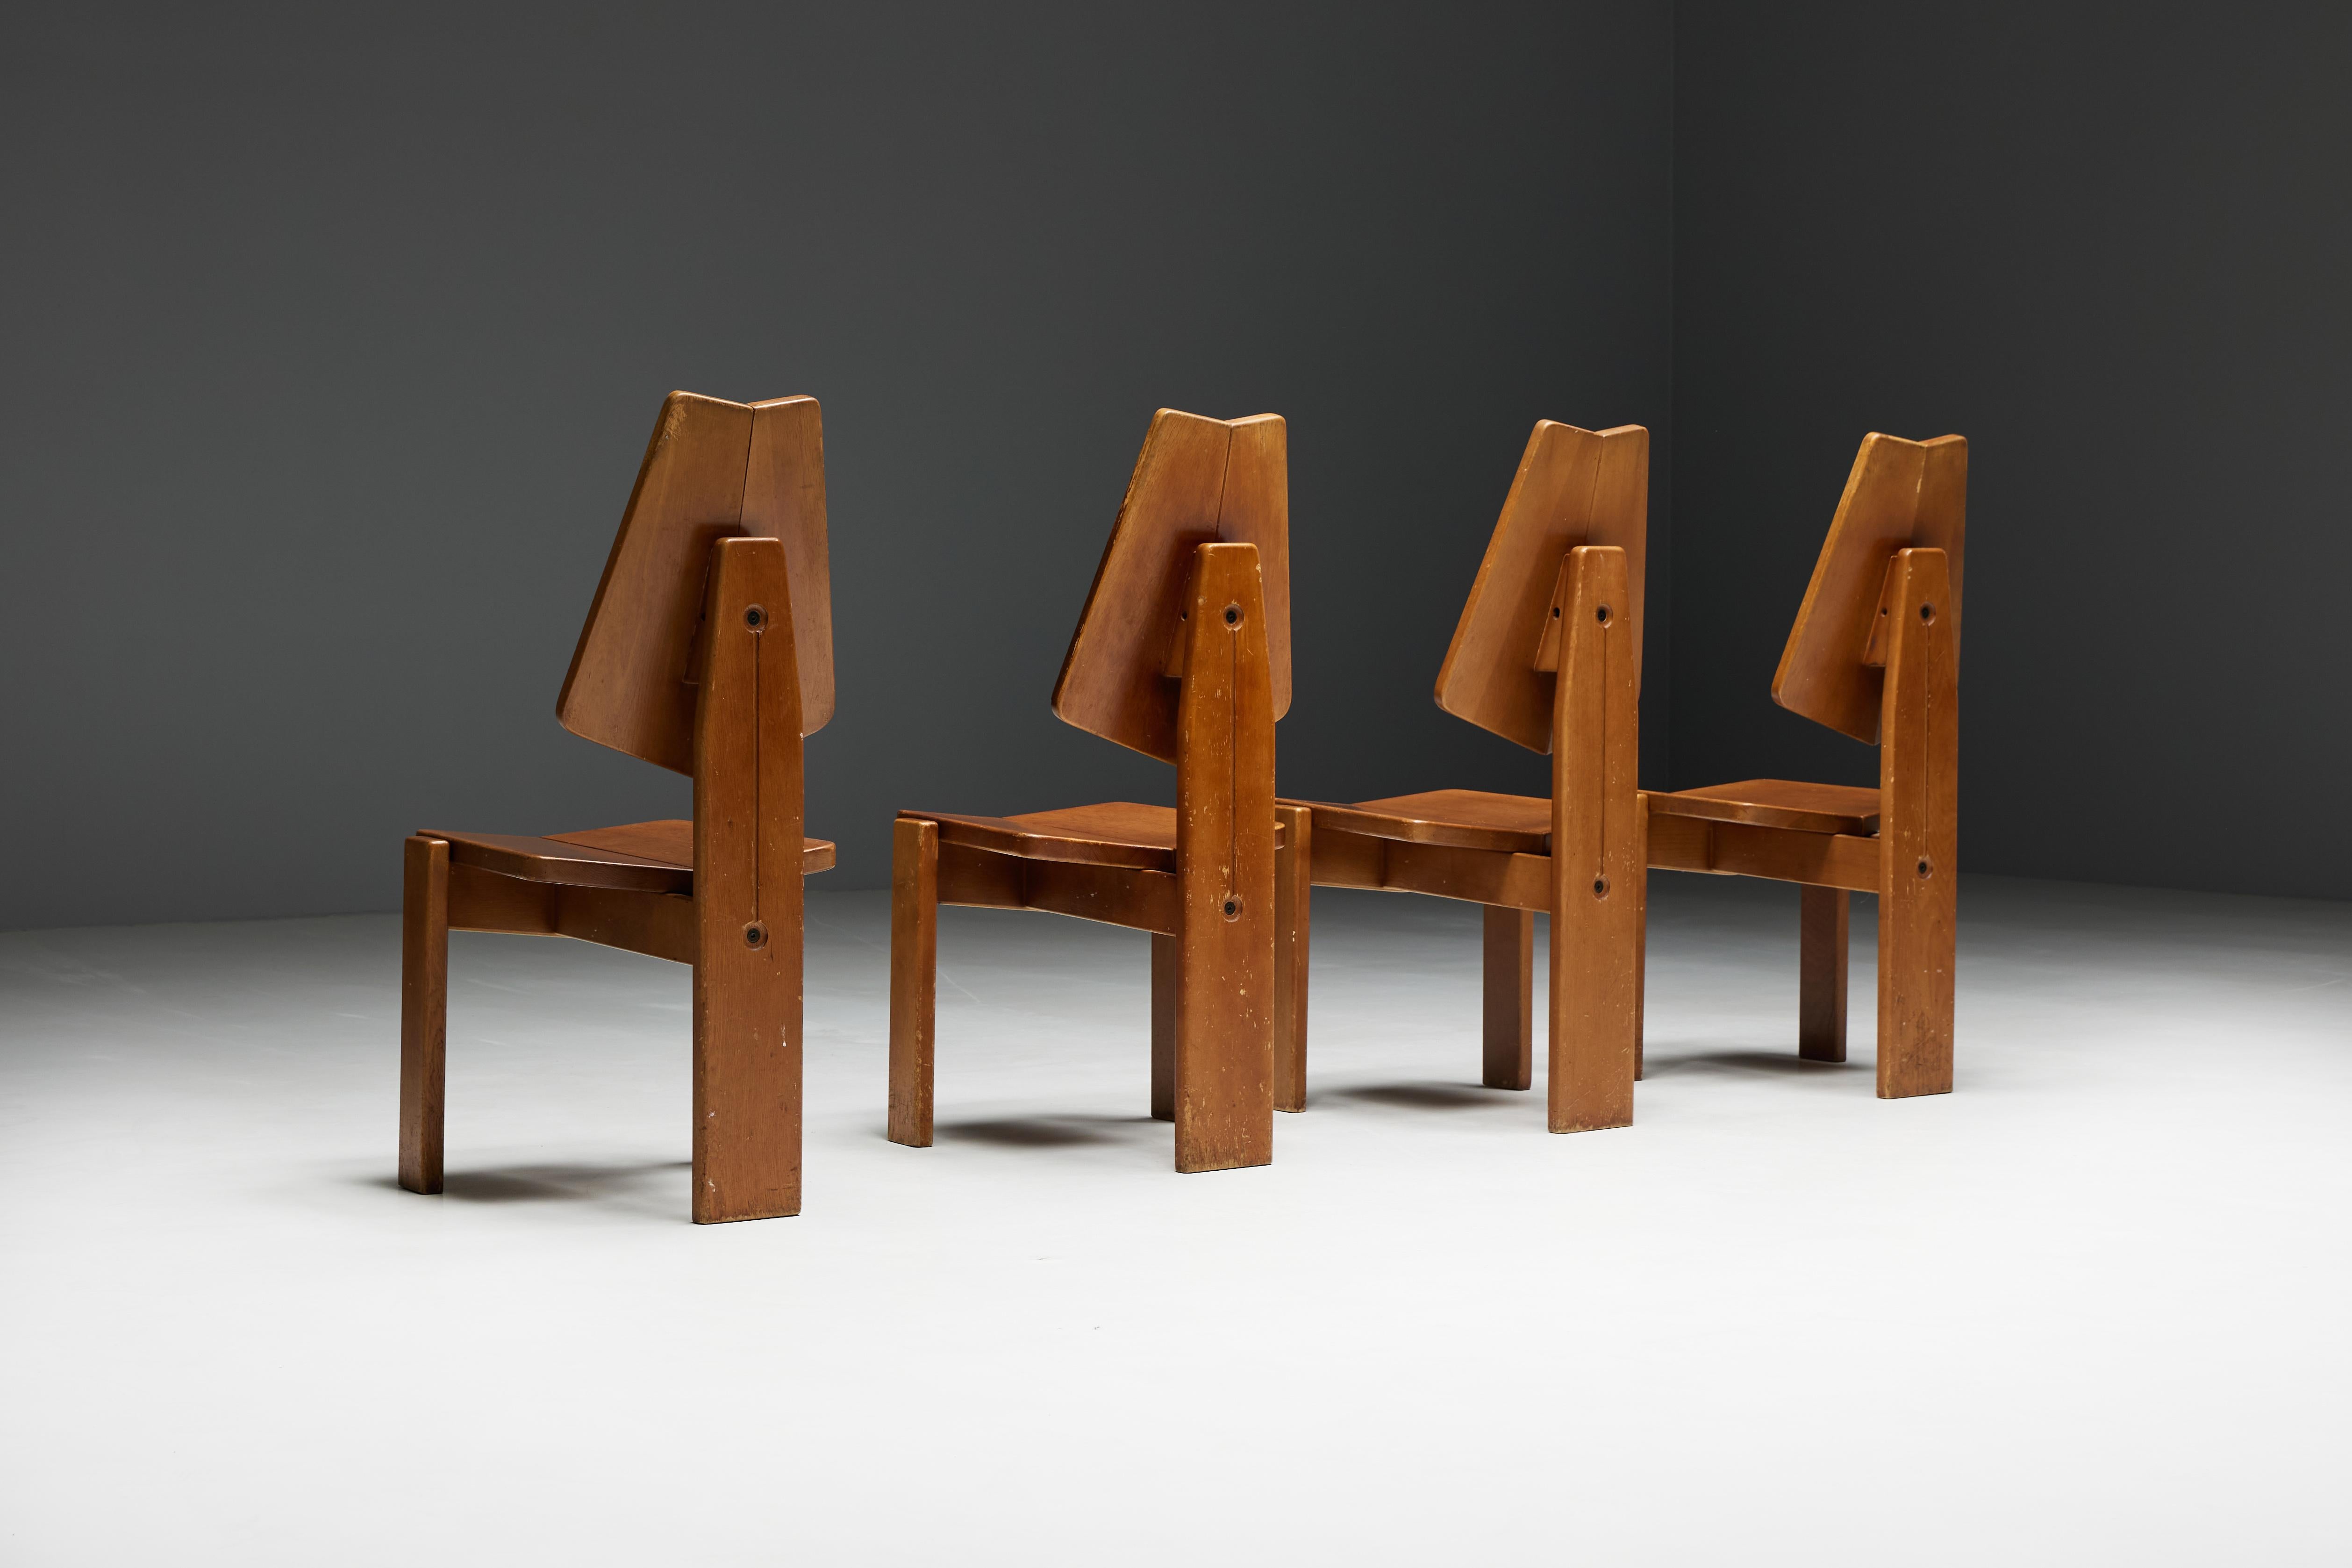 Late 20th Century Brutalist Wooden Dining Chairs, Belgium, 1970s For Sale